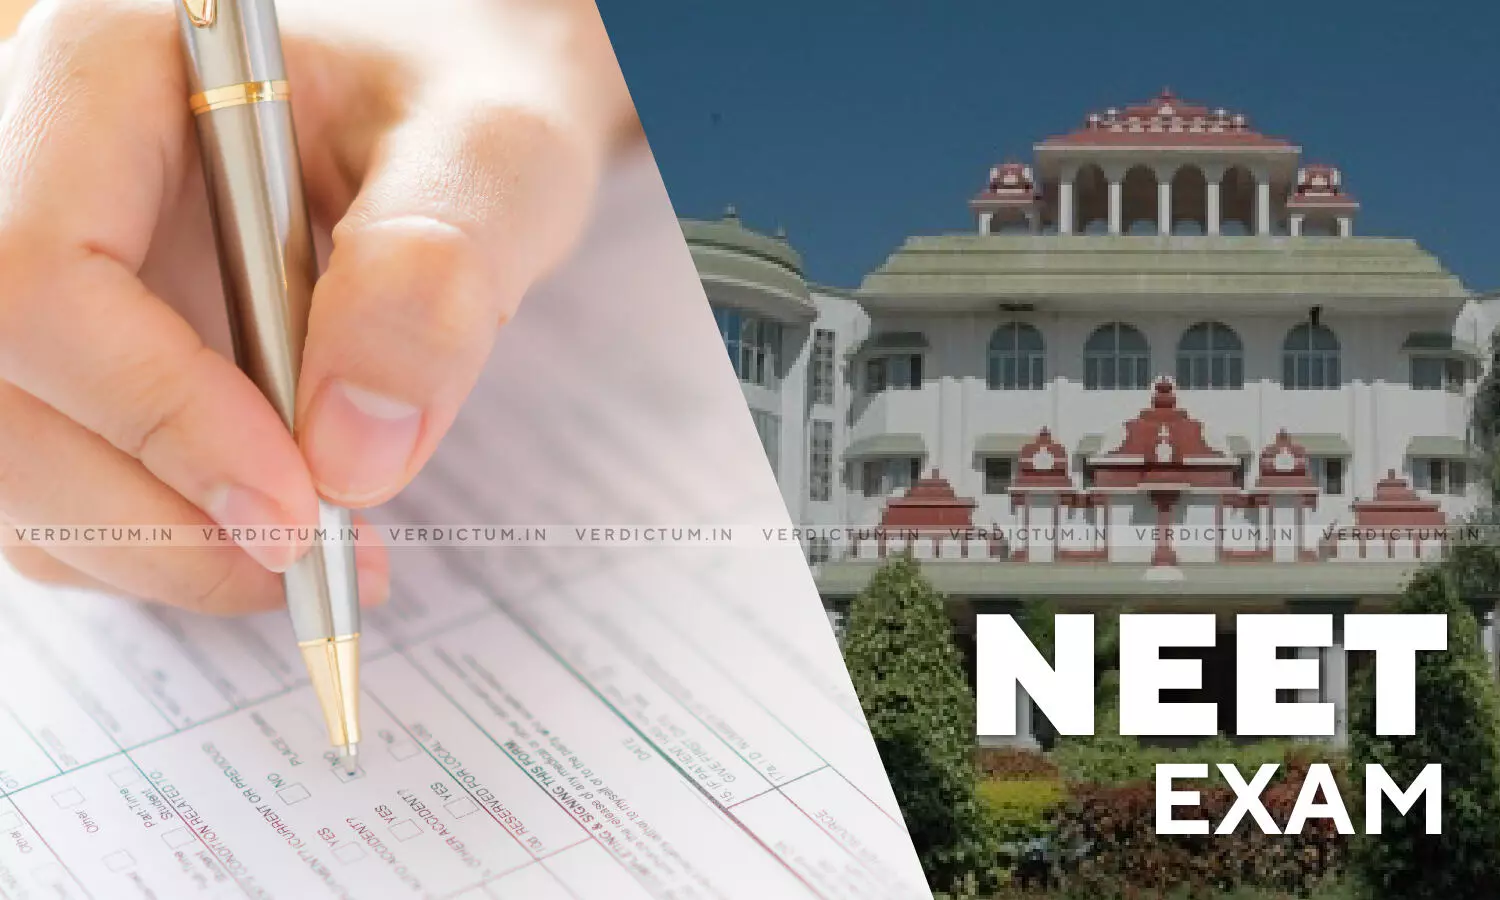 NEET Exam Row: Madras HC Issues Notice to TN Government In A PIL Against False Promises By DMK, Seeking Compensation For Students